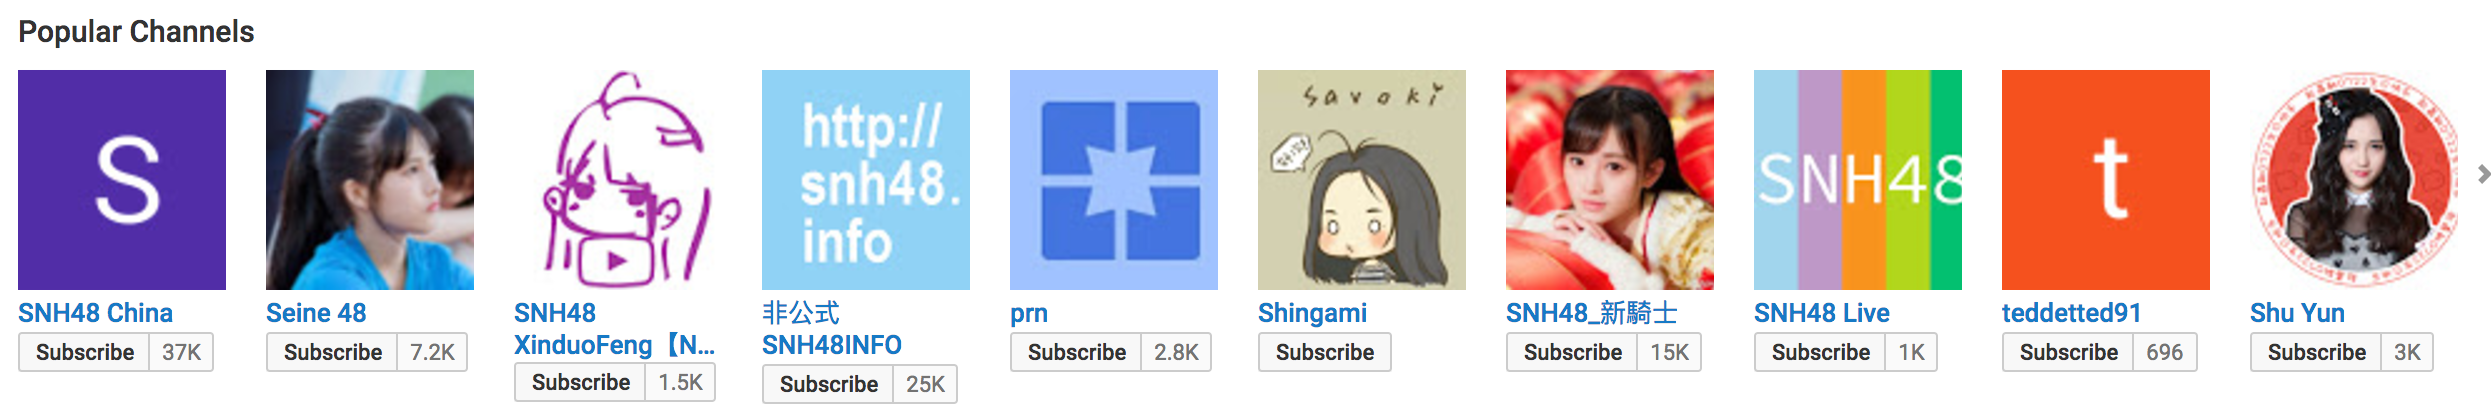 My channel among “Popular Channels” within the SNH48 topic.